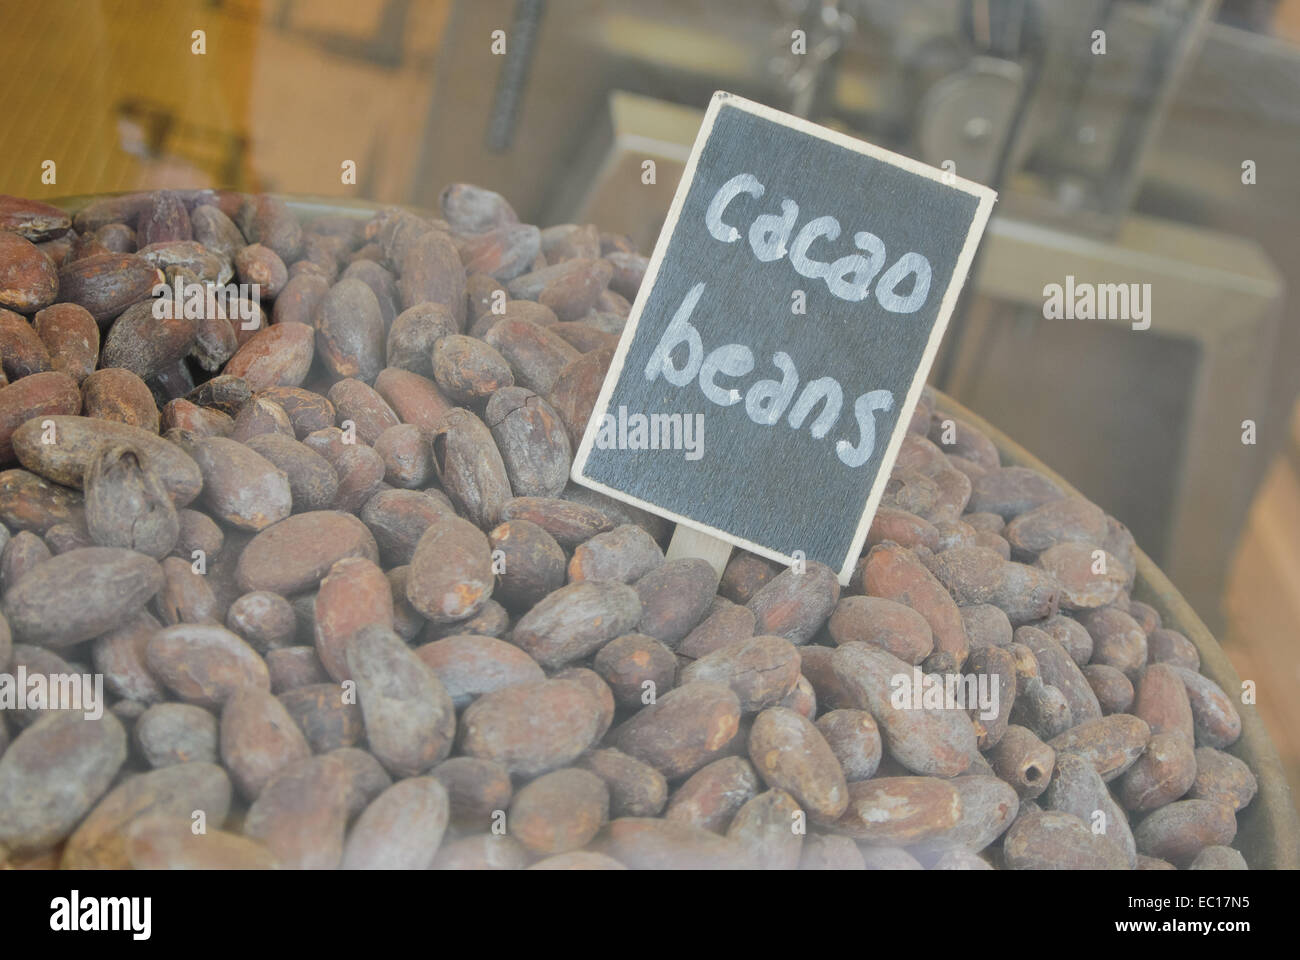 Cacao beans in display window Stock Photo